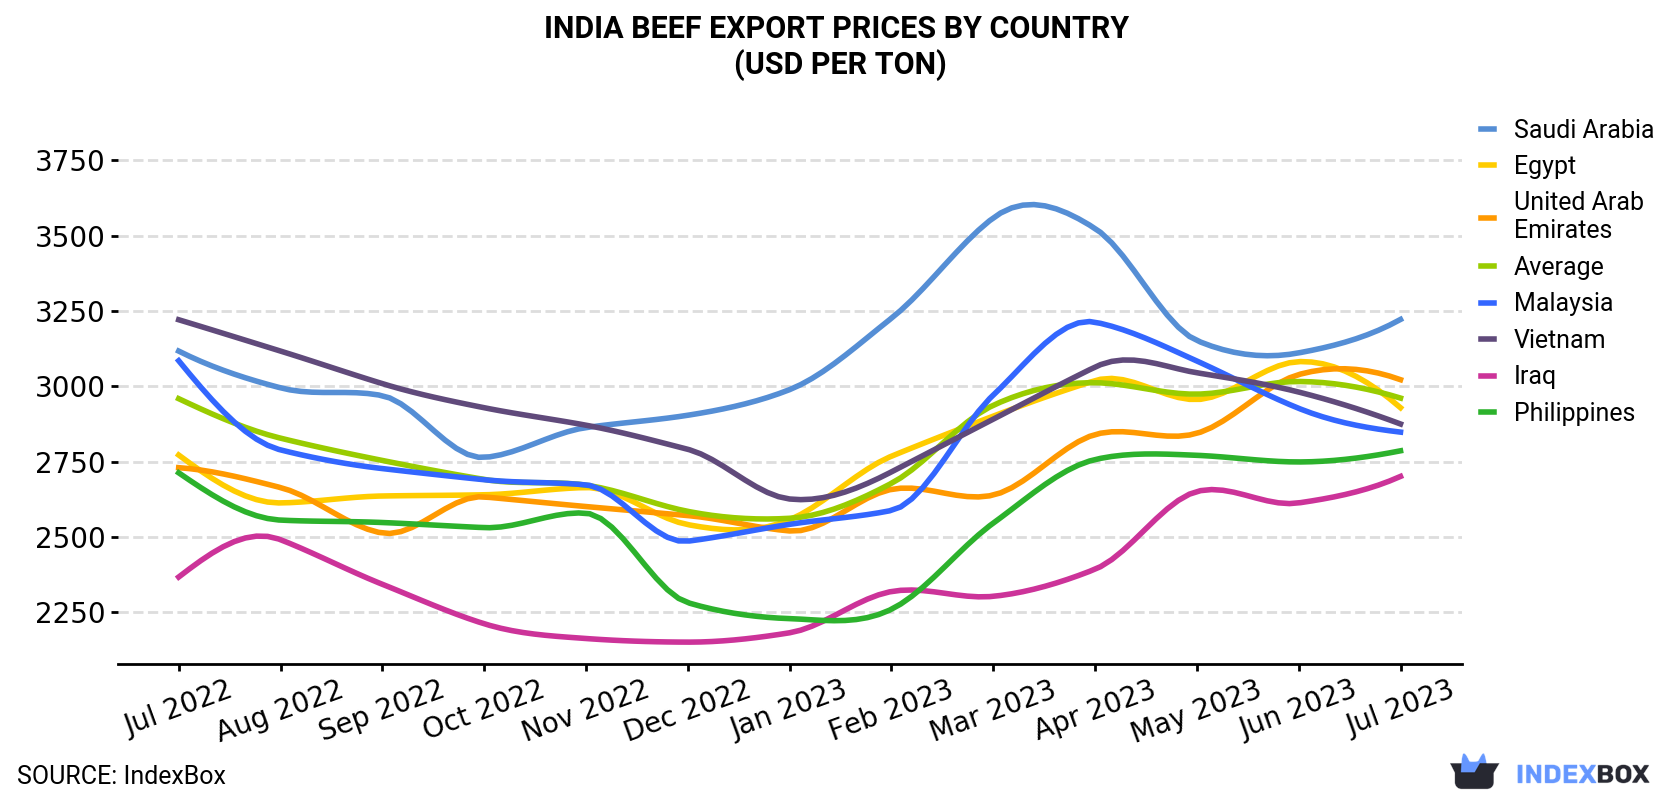 India Beef Export Prices By Country (USD Per Ton)